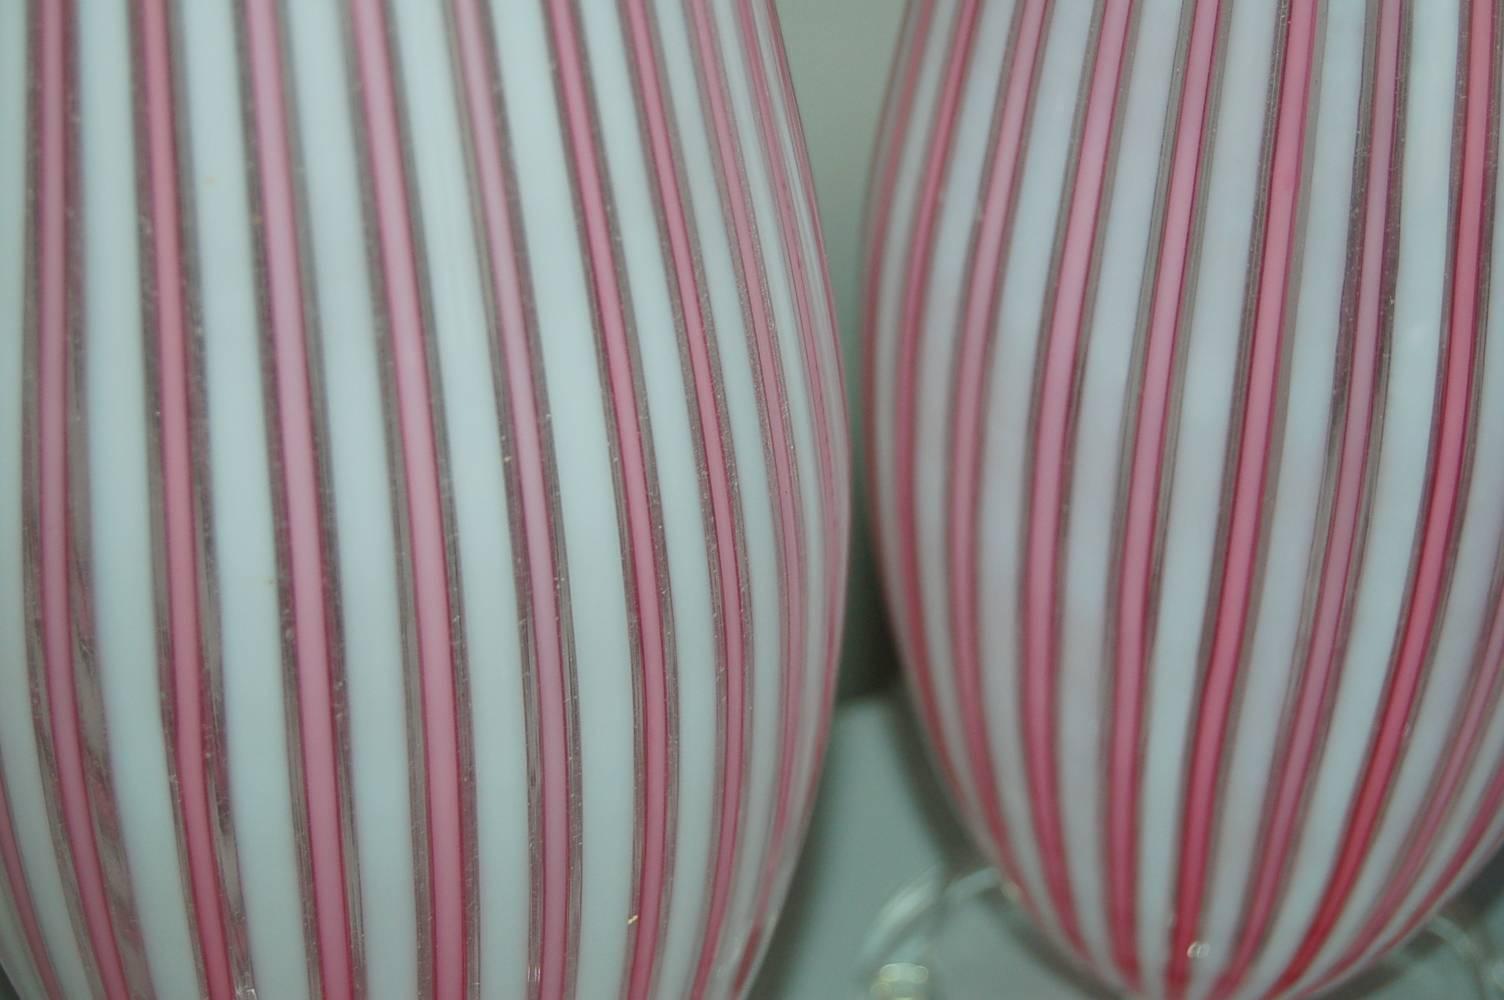 Plated Matched Pair of Striped Pink Vintage Murano Lamps by Dino Martens